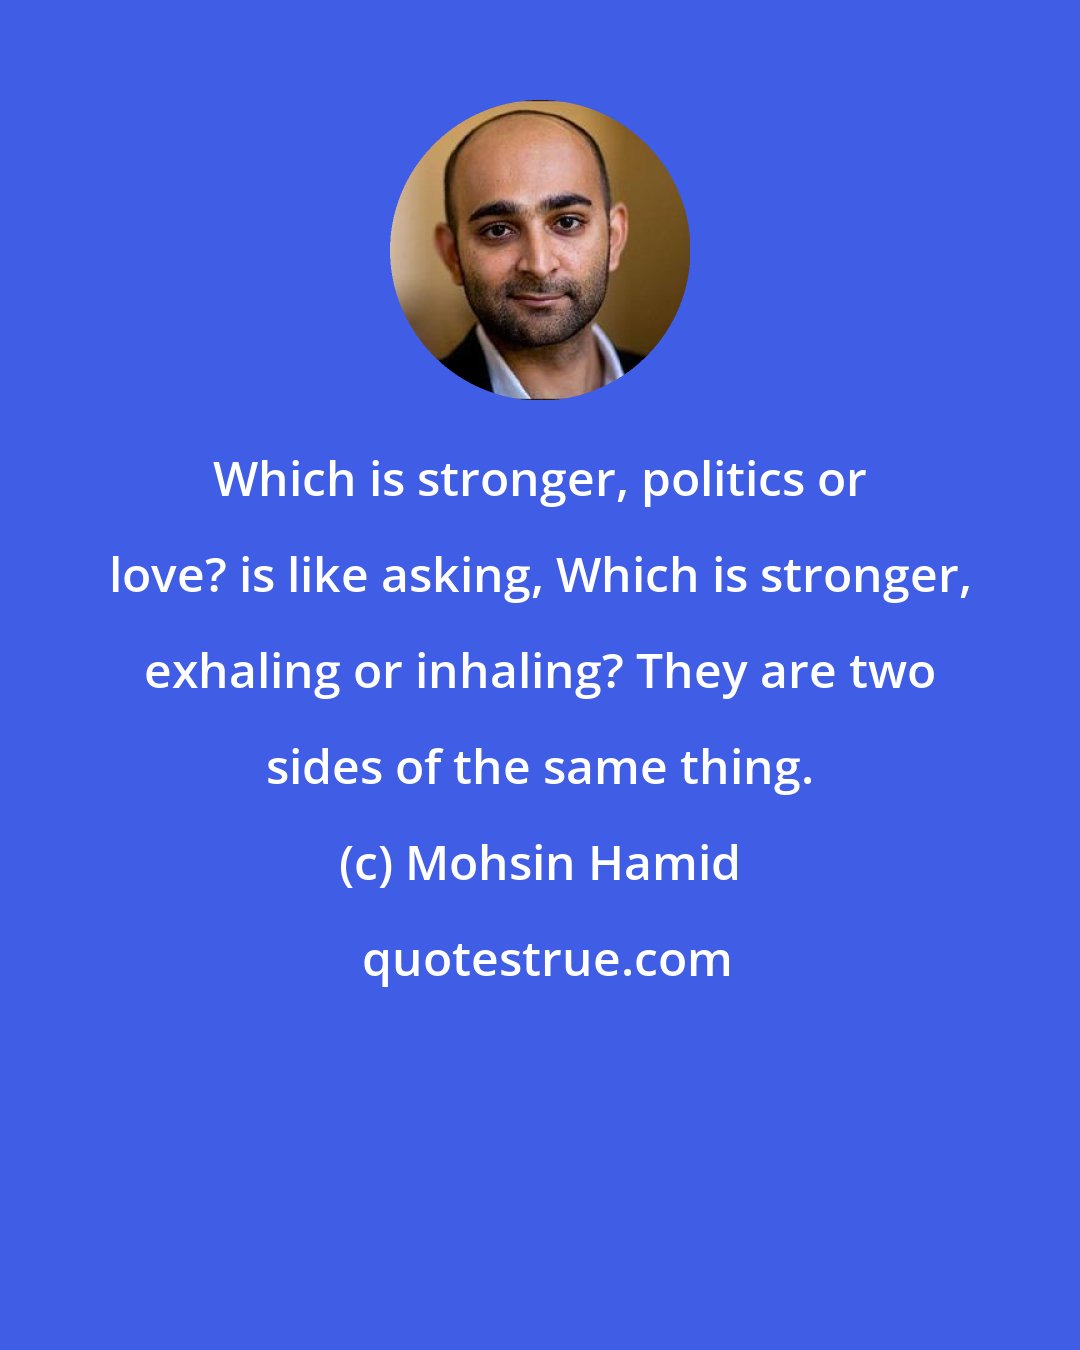 Mohsin Hamid: Which is stronger, politics or love? is like asking, Which is stronger, exhaling or inhaling? They are two sides of the same thing.